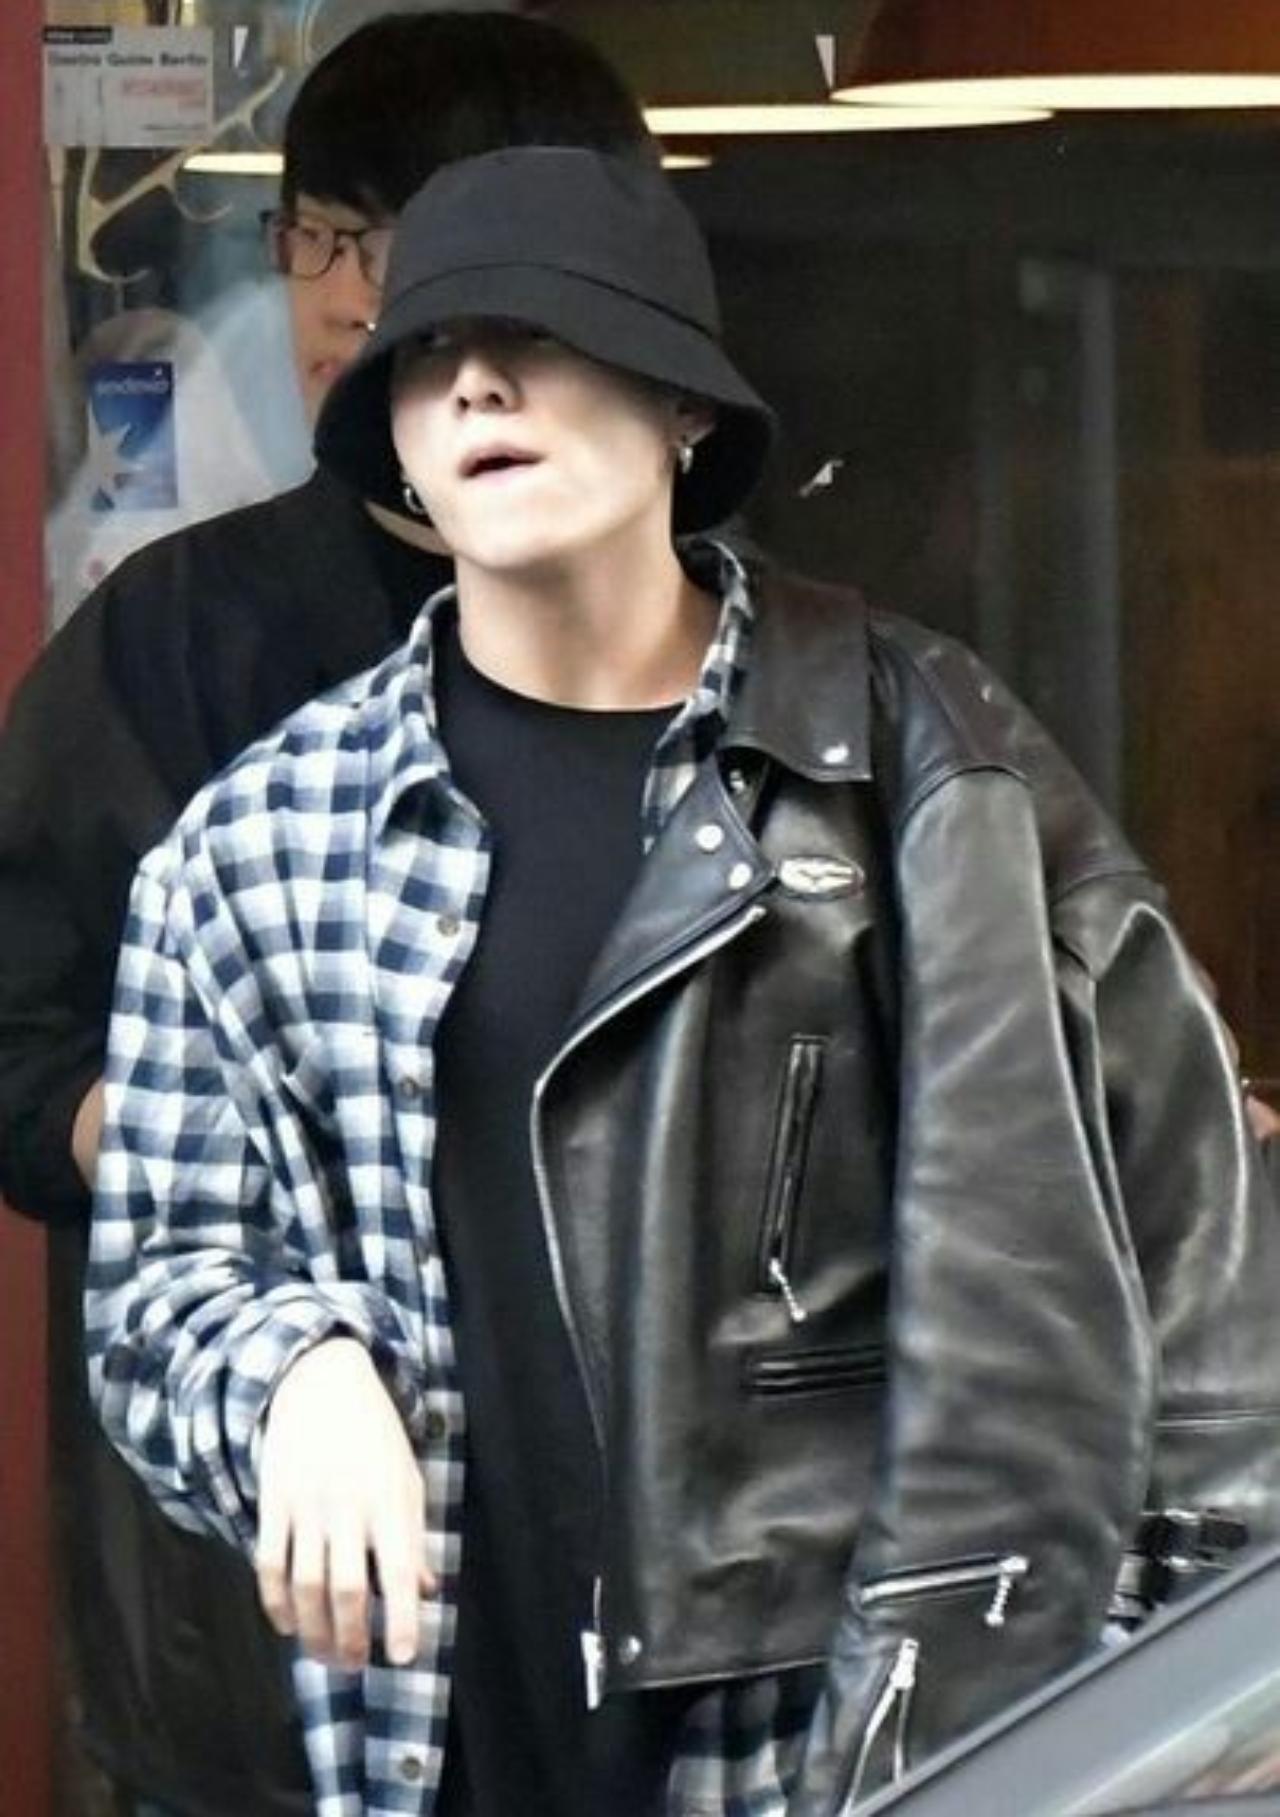 Layering is another style element that the artist enjoys. Here, Jungkook unusually pairs his t-shirt with a flannel shirt, simultaneously layering it with a leather jacket. This adds both depth as well as visual intringue to the outfit. We have no idea whether Jungkook knows what kind of impact he has - but he does it very well!